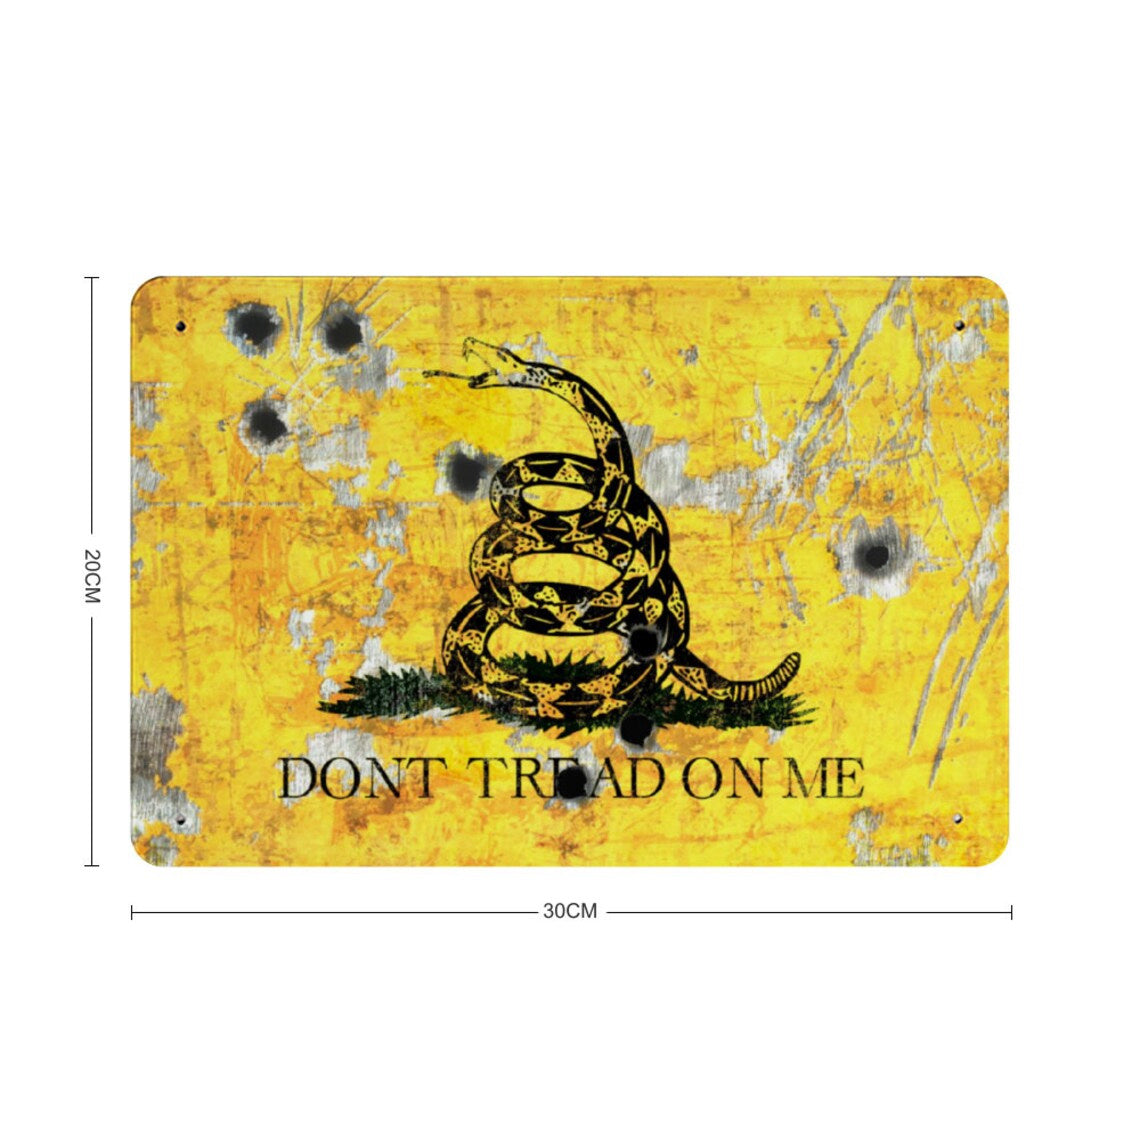 Gadsden Flag on Distressed Metal with Bullet Hole Don’t tread on Me Print on Metal dimensions